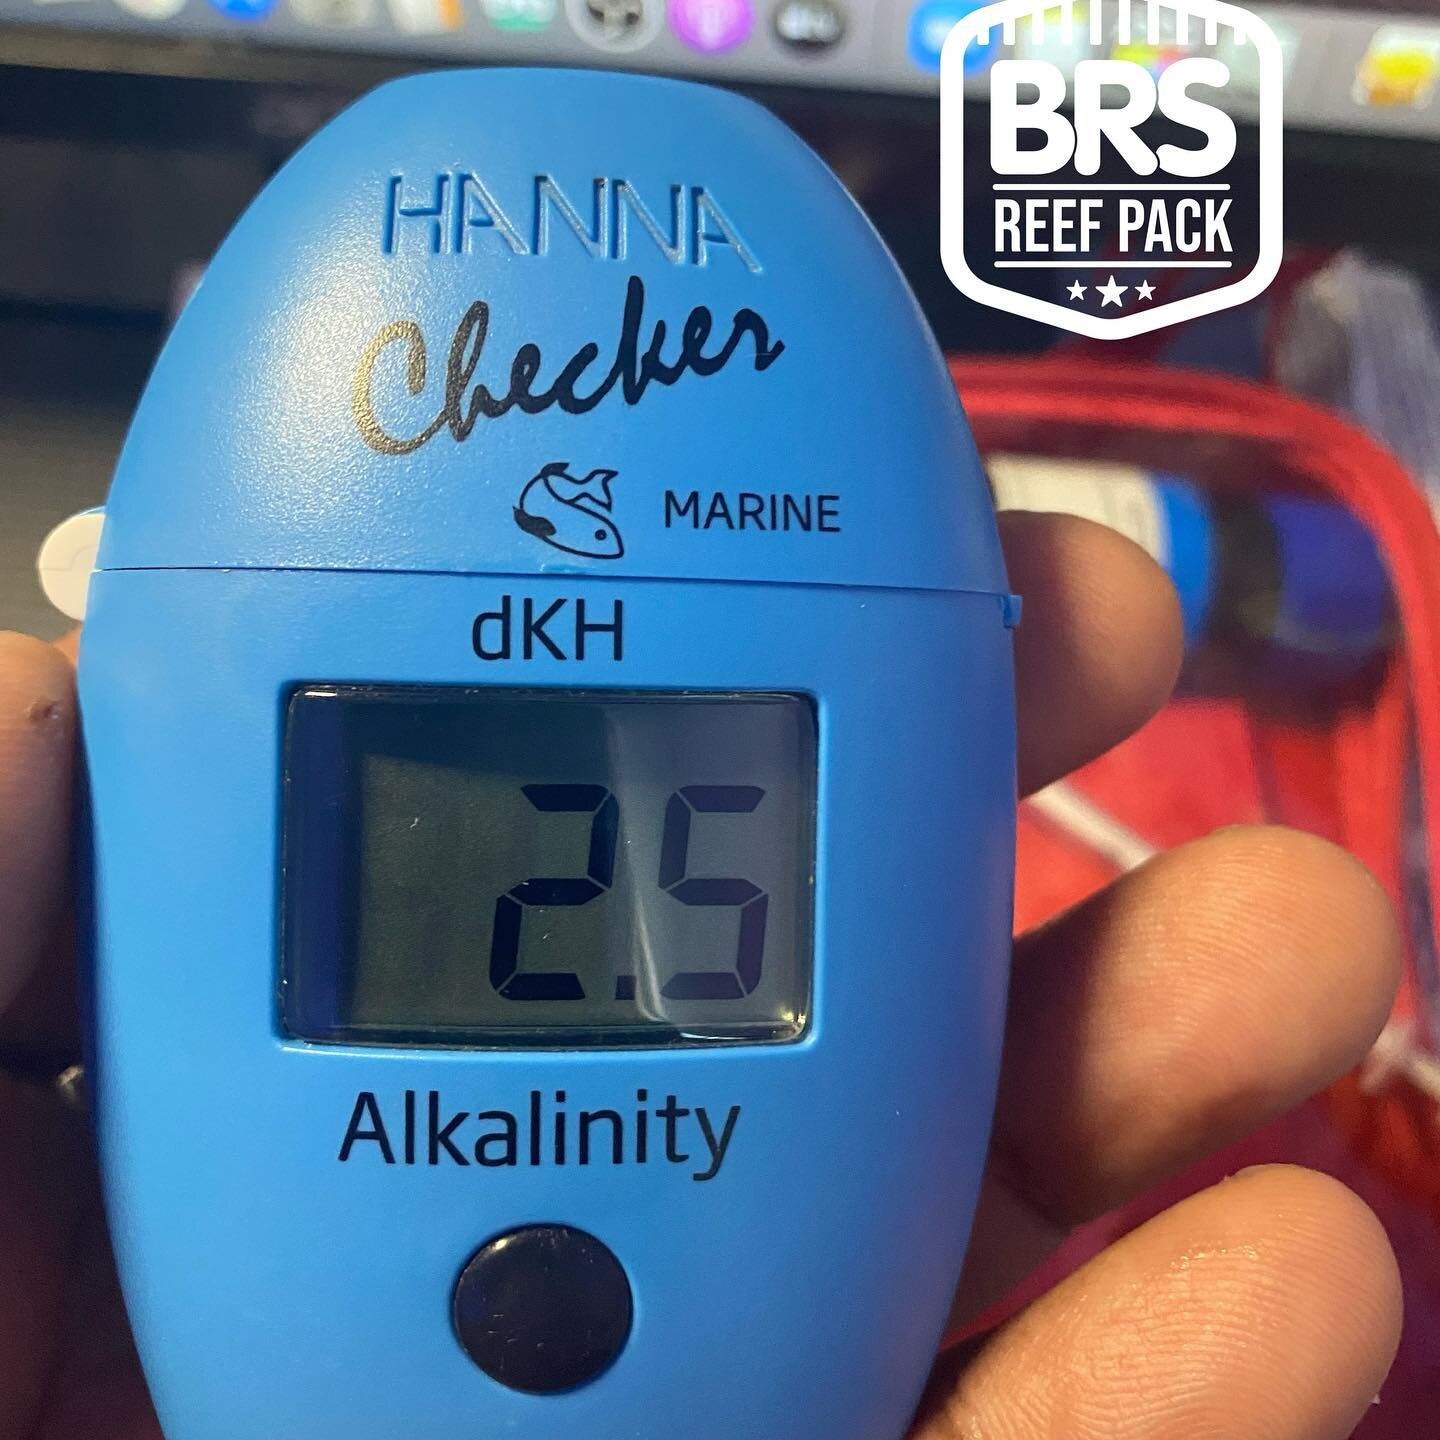 Uhhh - I think I need some @bulkreefsupply 2 part. Good thing it&rsquo;s 20% off today with code WITHO. Yup that&rsquo;s my real alk that I tested this morning.
.
.
#brsreefpack #2partdosing #reeftank #reefaquarium #saltwateraquarium #hannainstrument